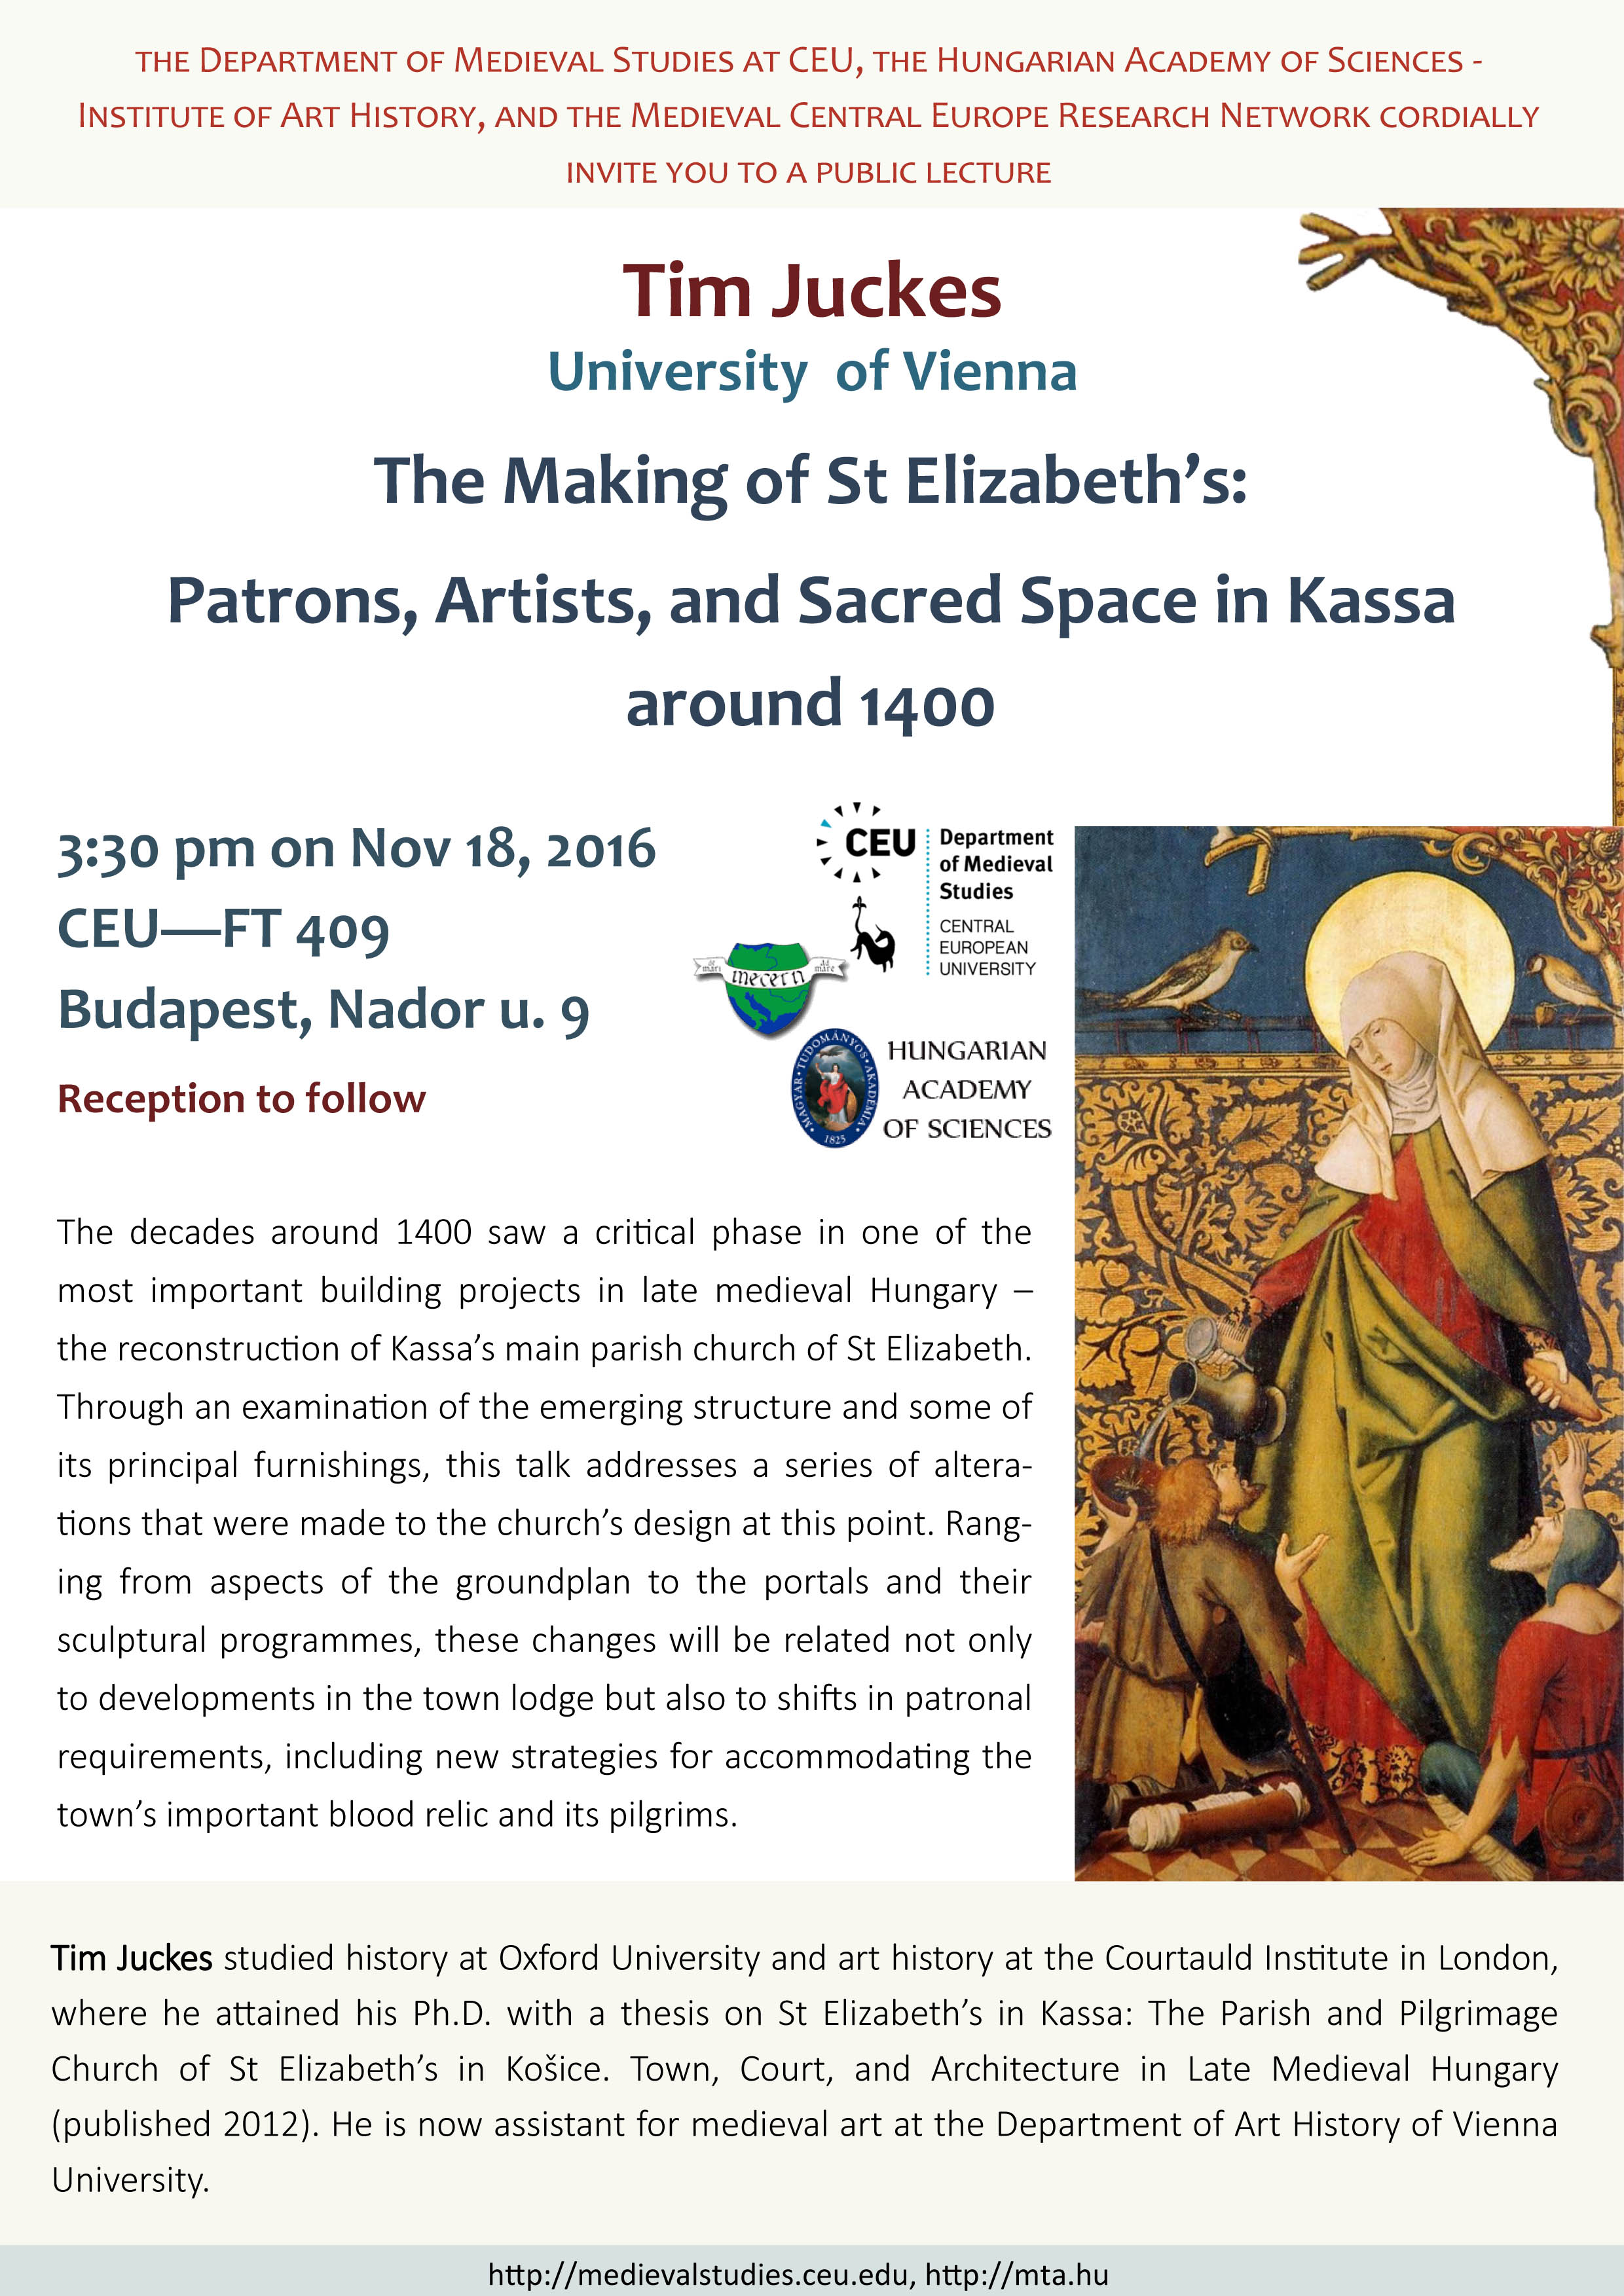 Public lecture: The Making of St Elizabeth’s: Patrons, Artists, and Sacred Space in Kassa around 1400 by Tim Juckes